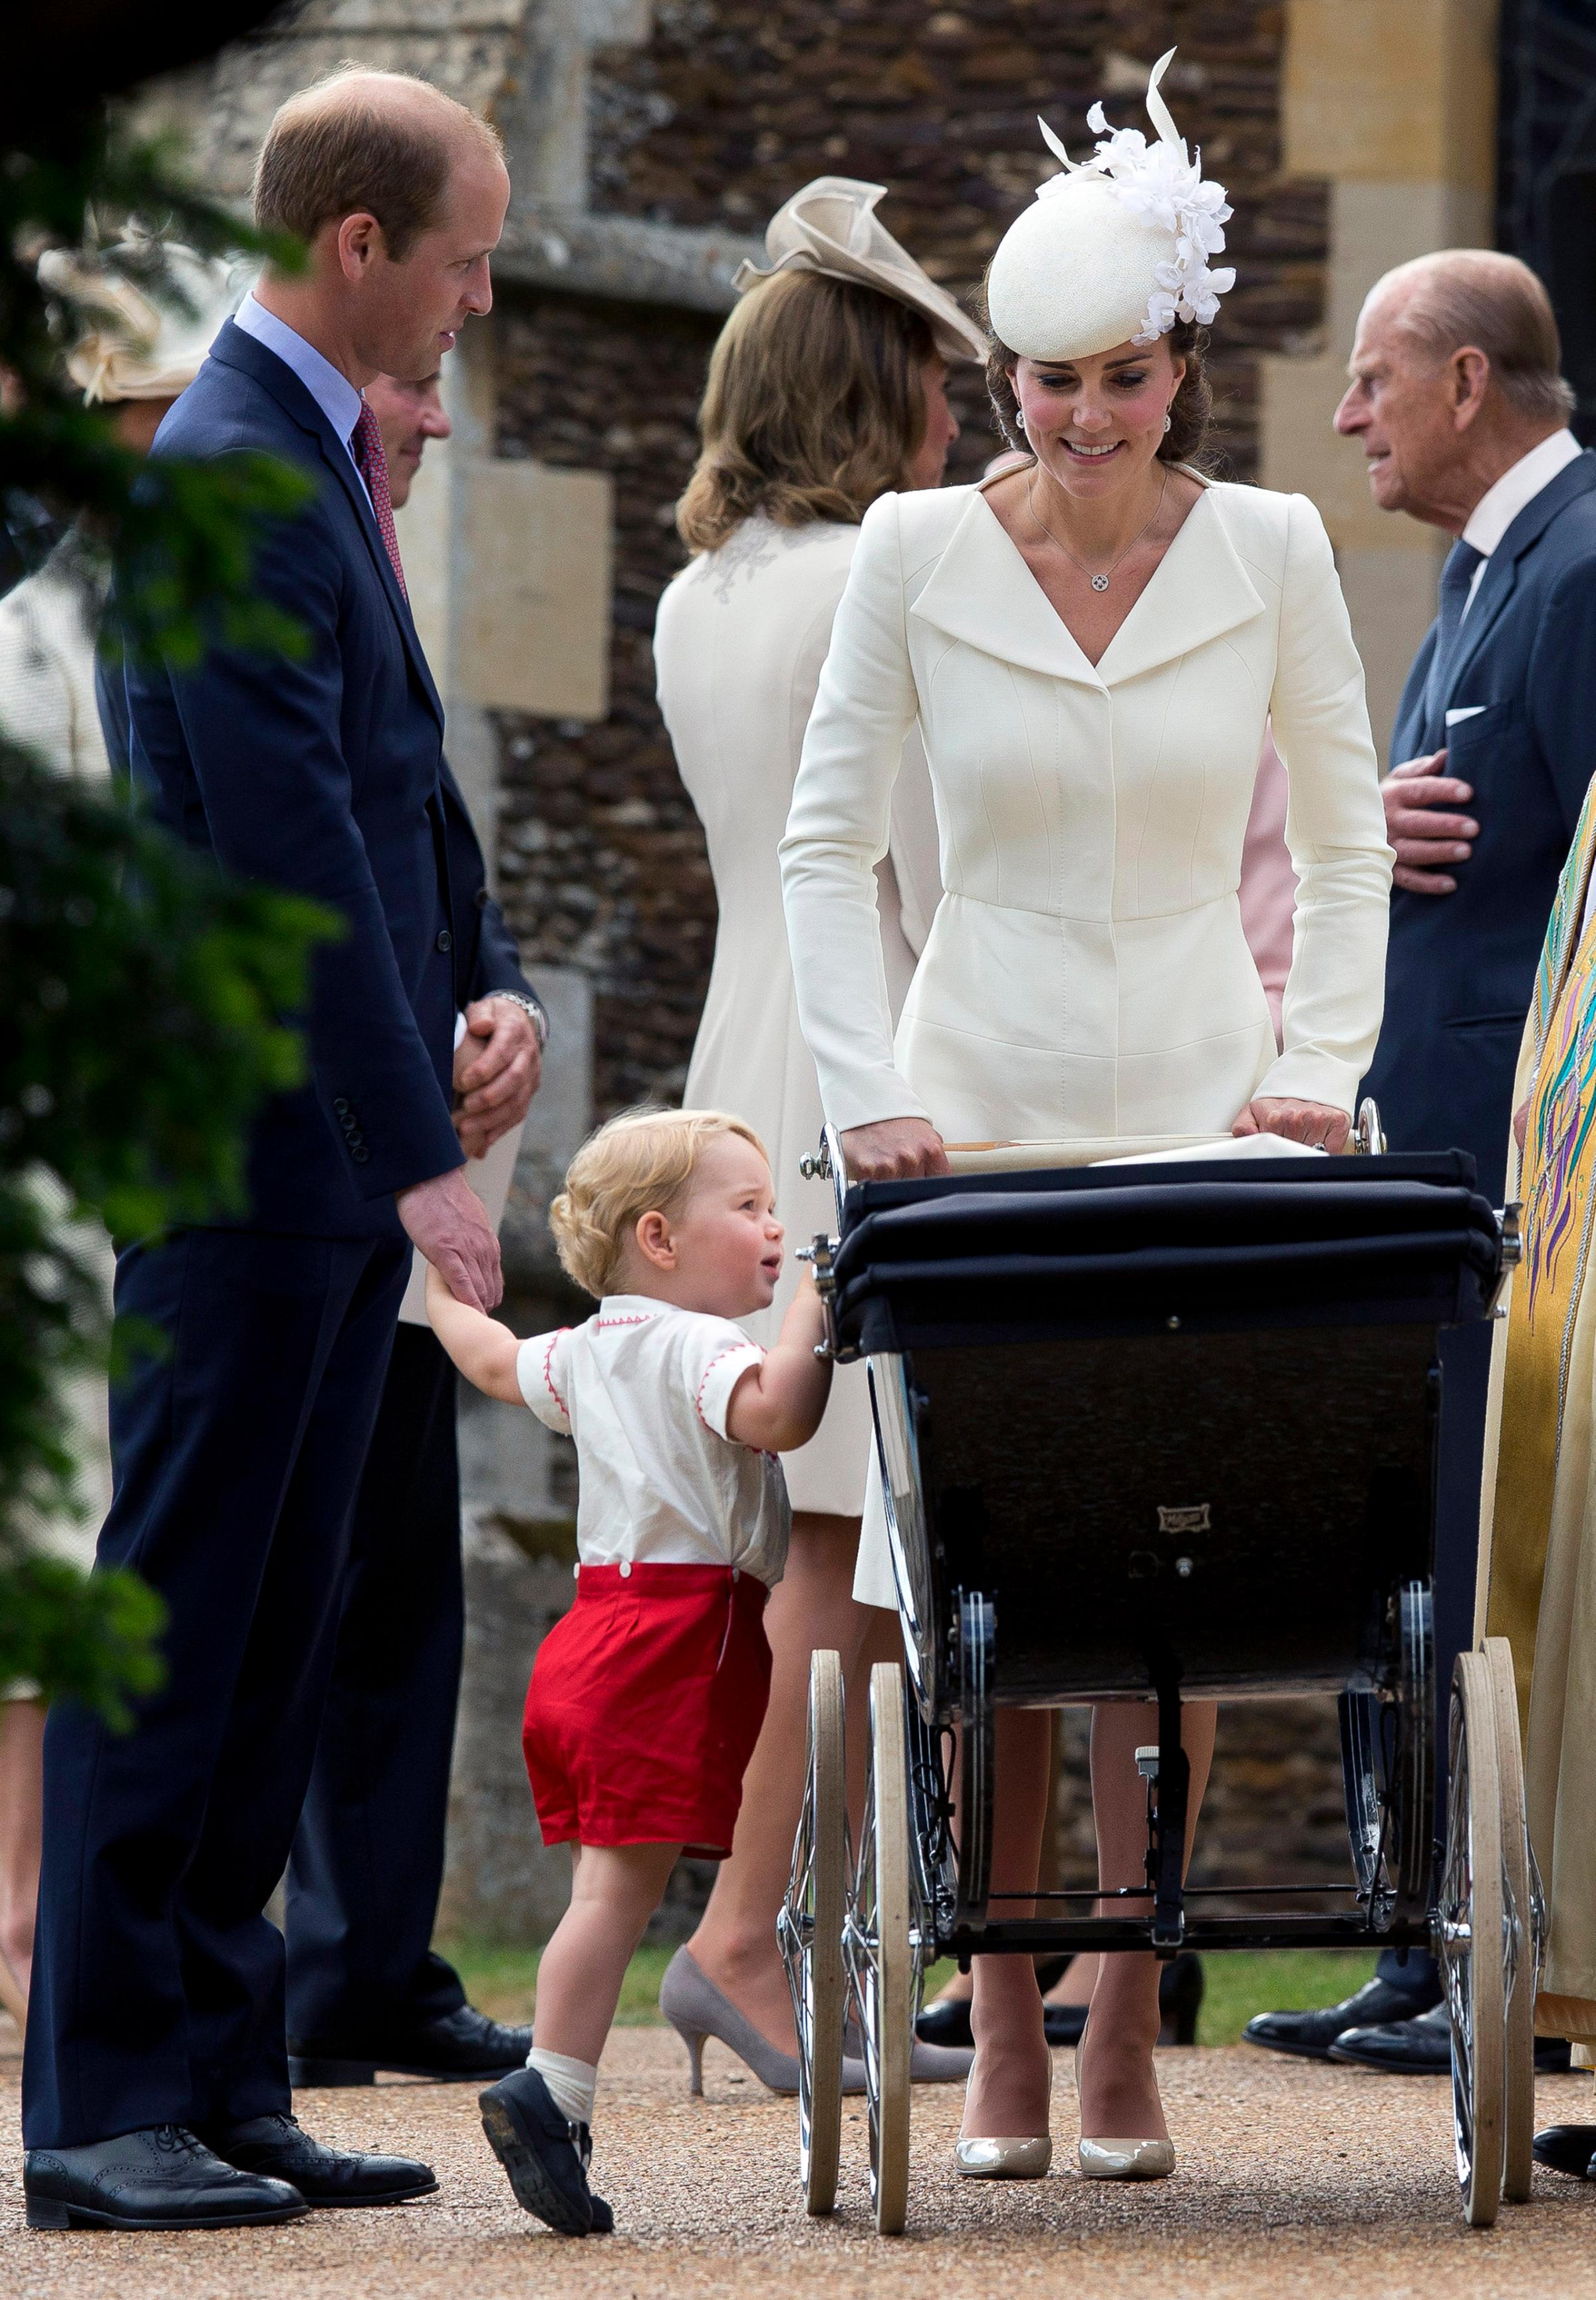 Catherine, Duchess of Cambridge, Prince William, Duke of Cambridge, Princess Charlotte of Cambridge and Prince George of Cambridge leave the Church of St Mary Magdalene on the Sandringham Estate after the Christening of Princess Charlotte of Cambridge in King's Lynn, England on July 5, 2015.